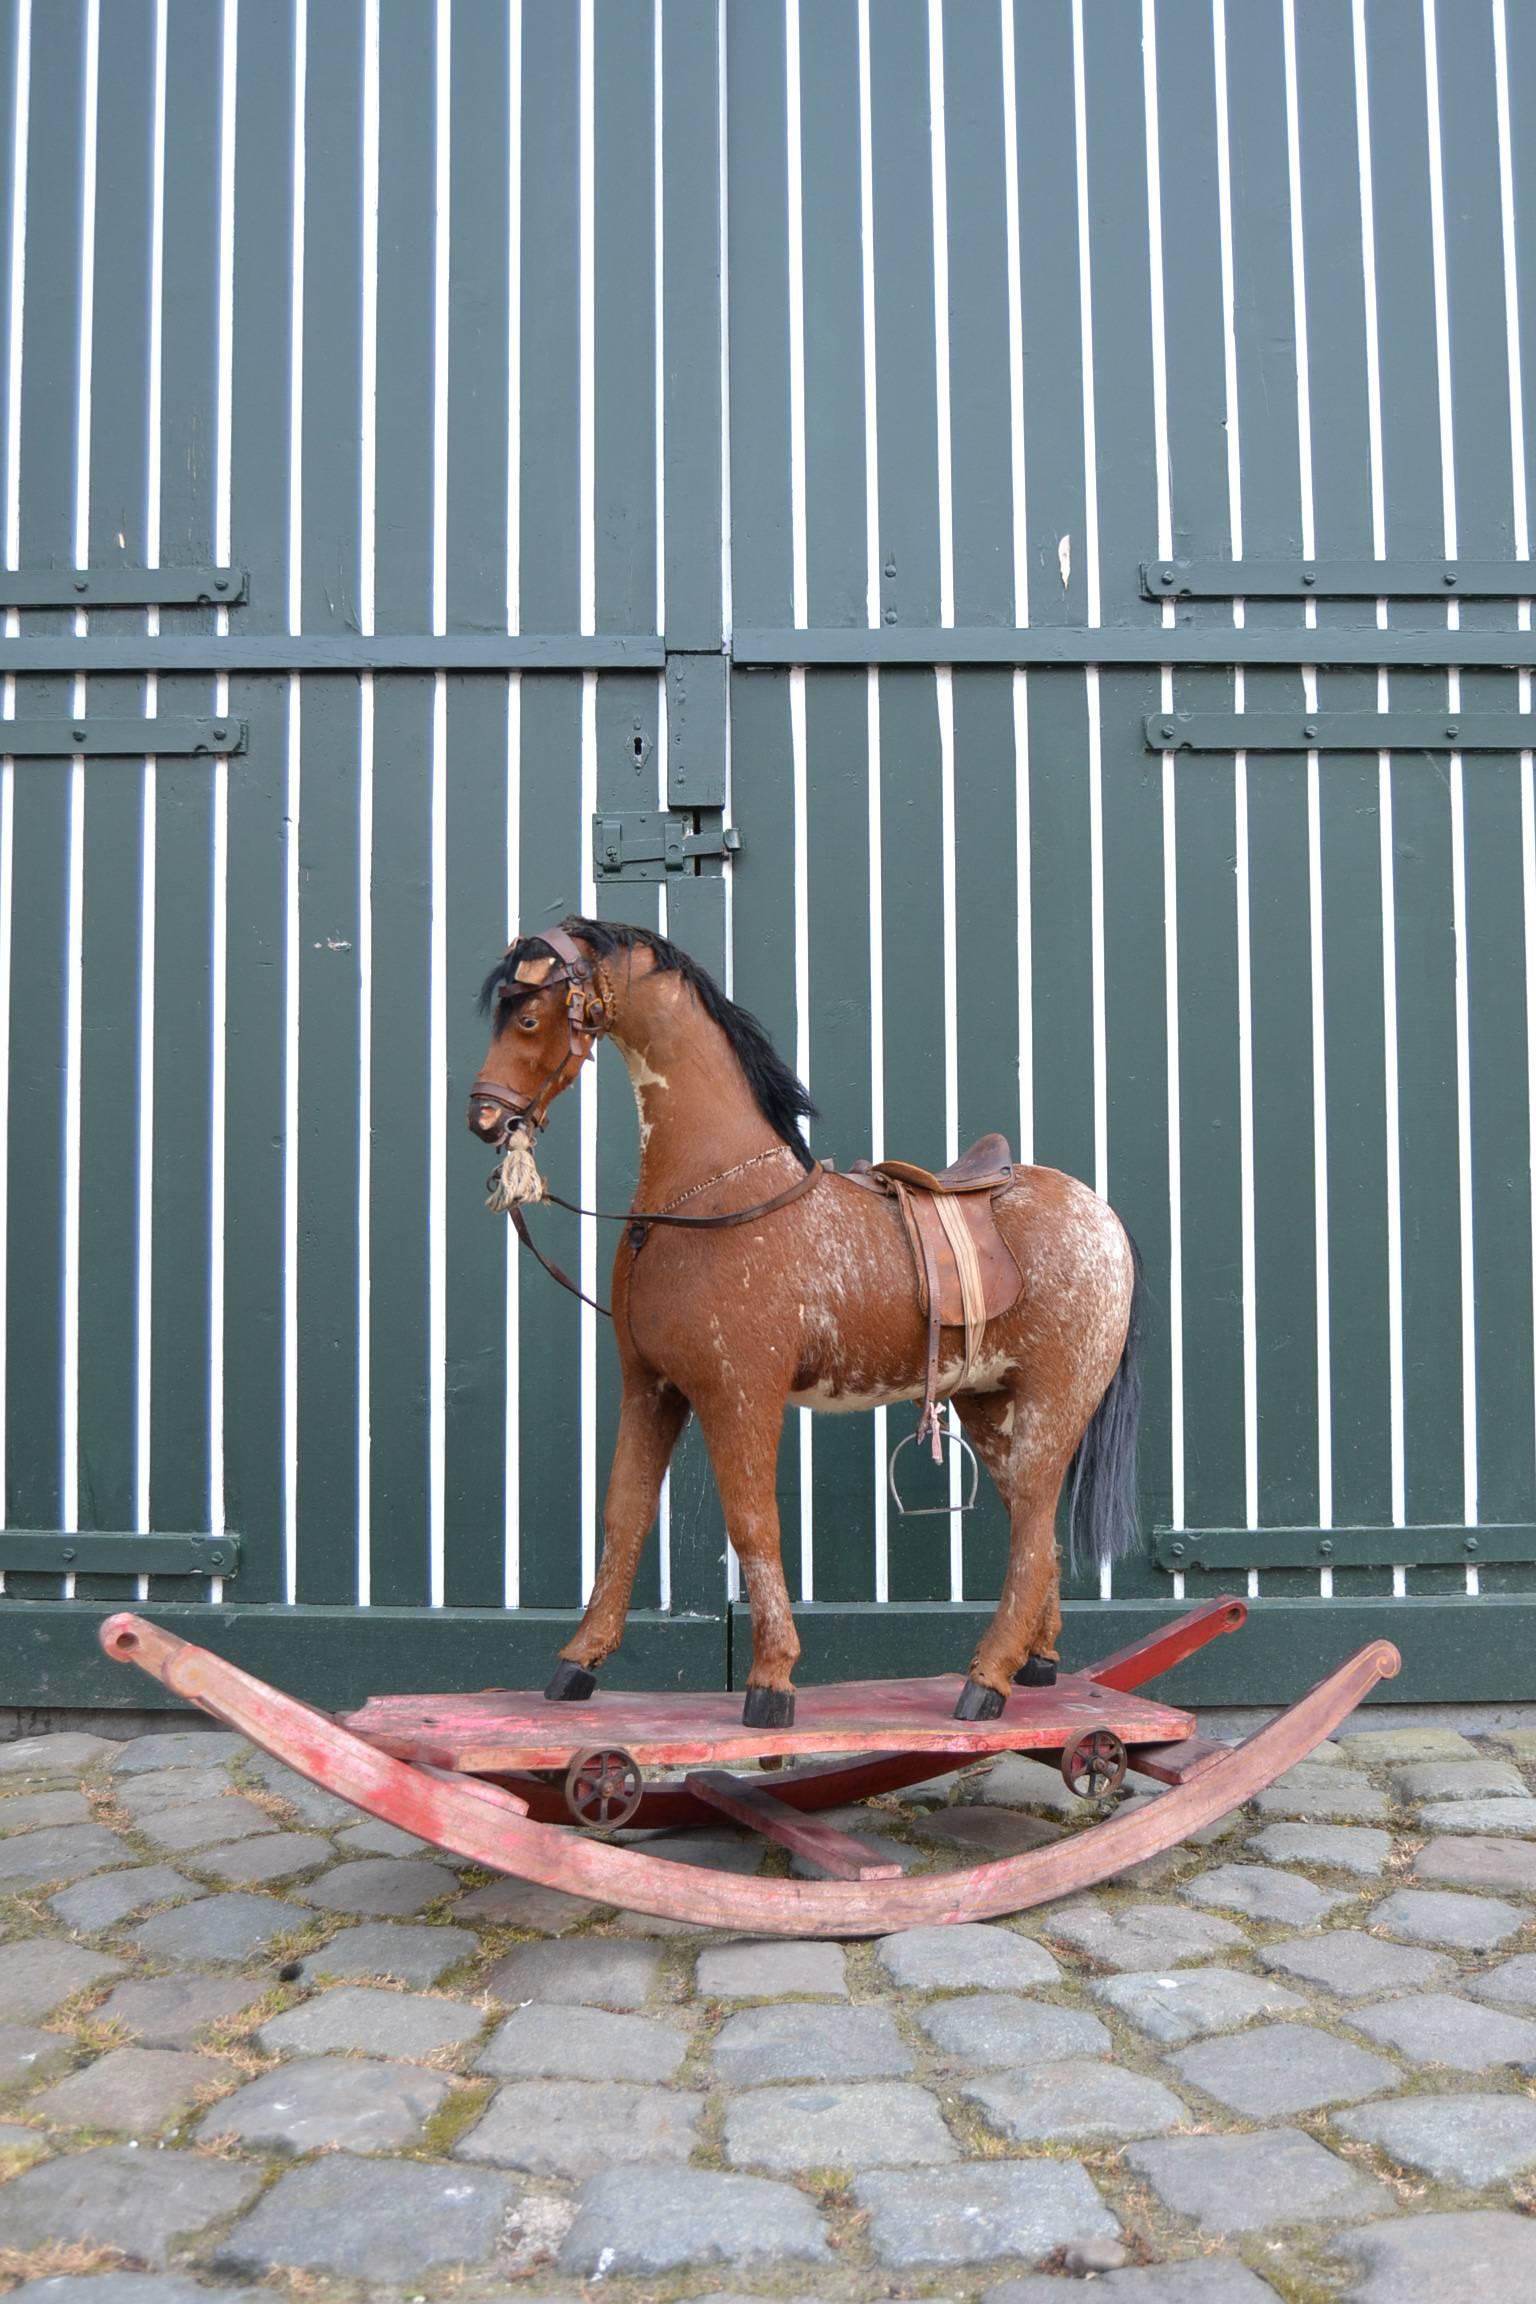 Antique toy horse from the early 20th century.
Horse has glass eyes, wooden legs, metal bit, real horsehair, real skin, leather halter, stirrups and saddle and is stuffed with straw.

You can remove the horse of the swing and use it separately on